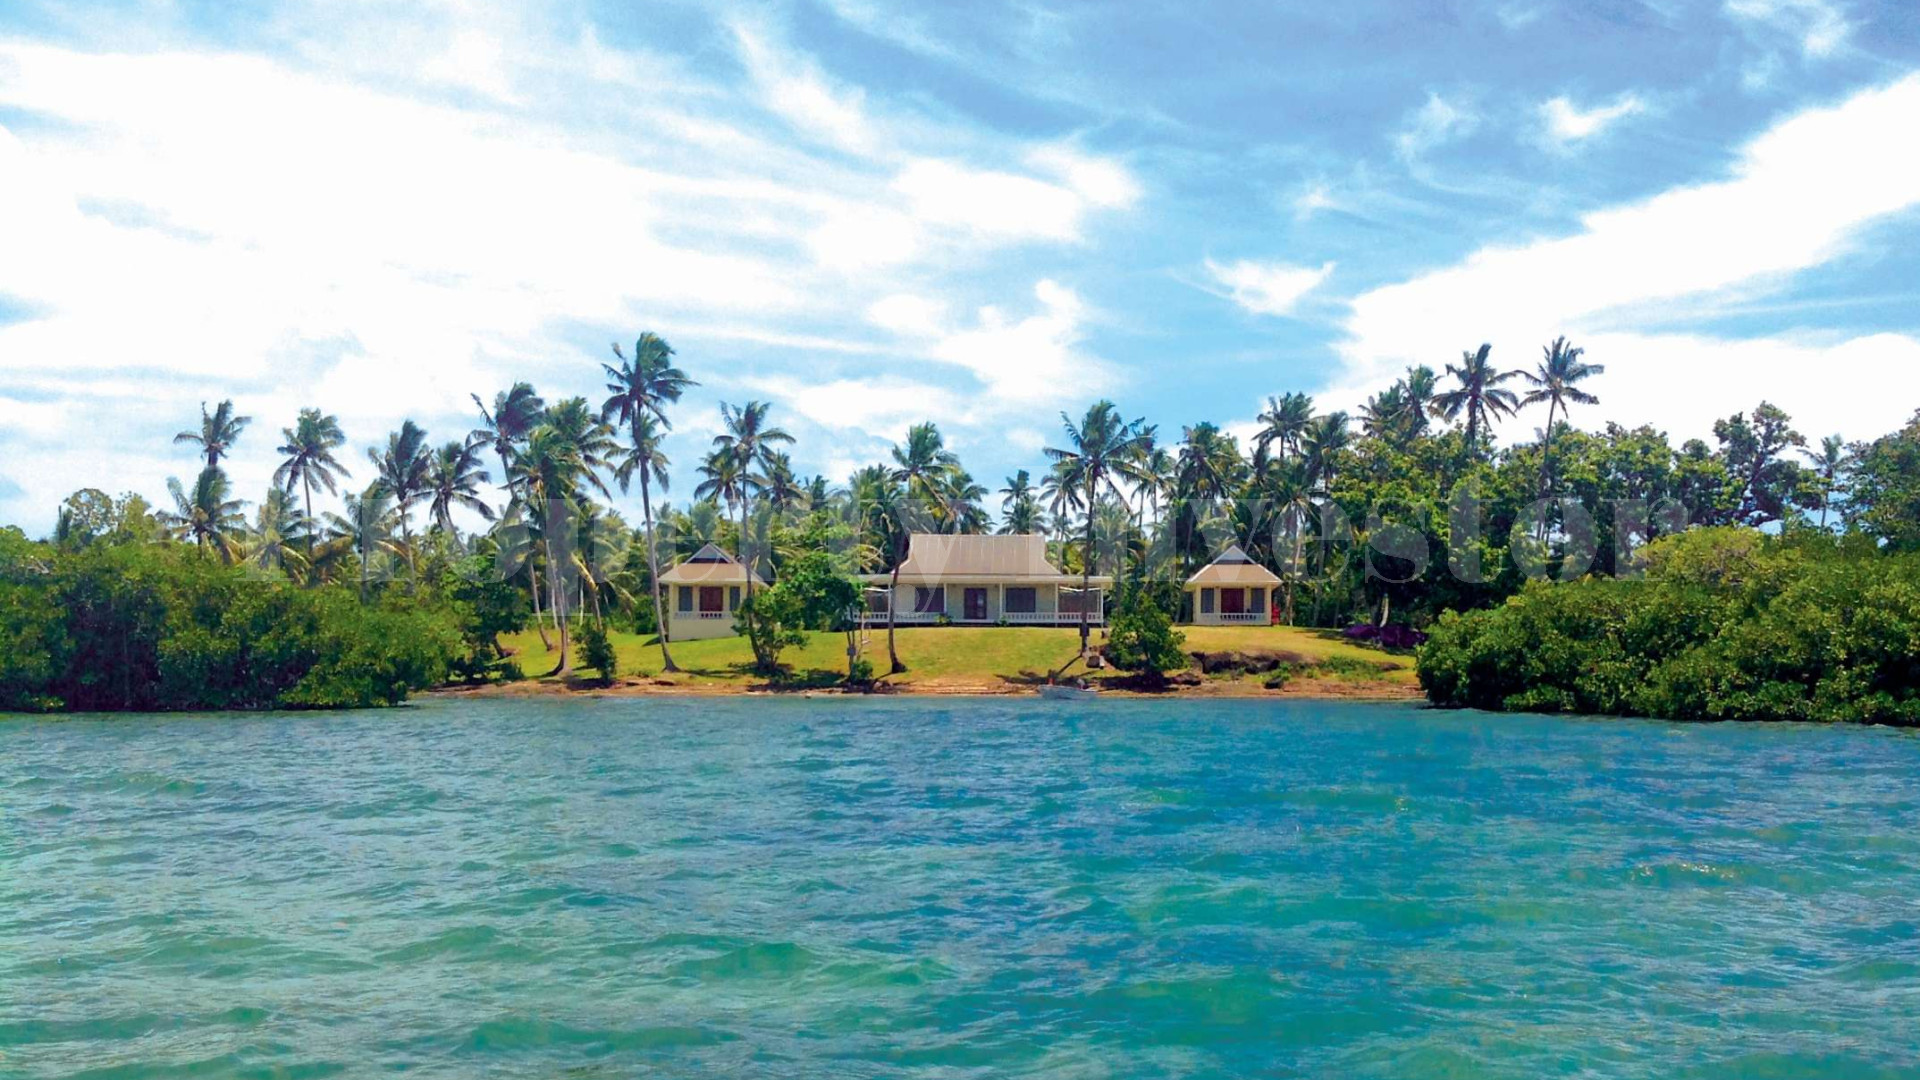 53 Acre Private Island & Residence for Sale in Fiji